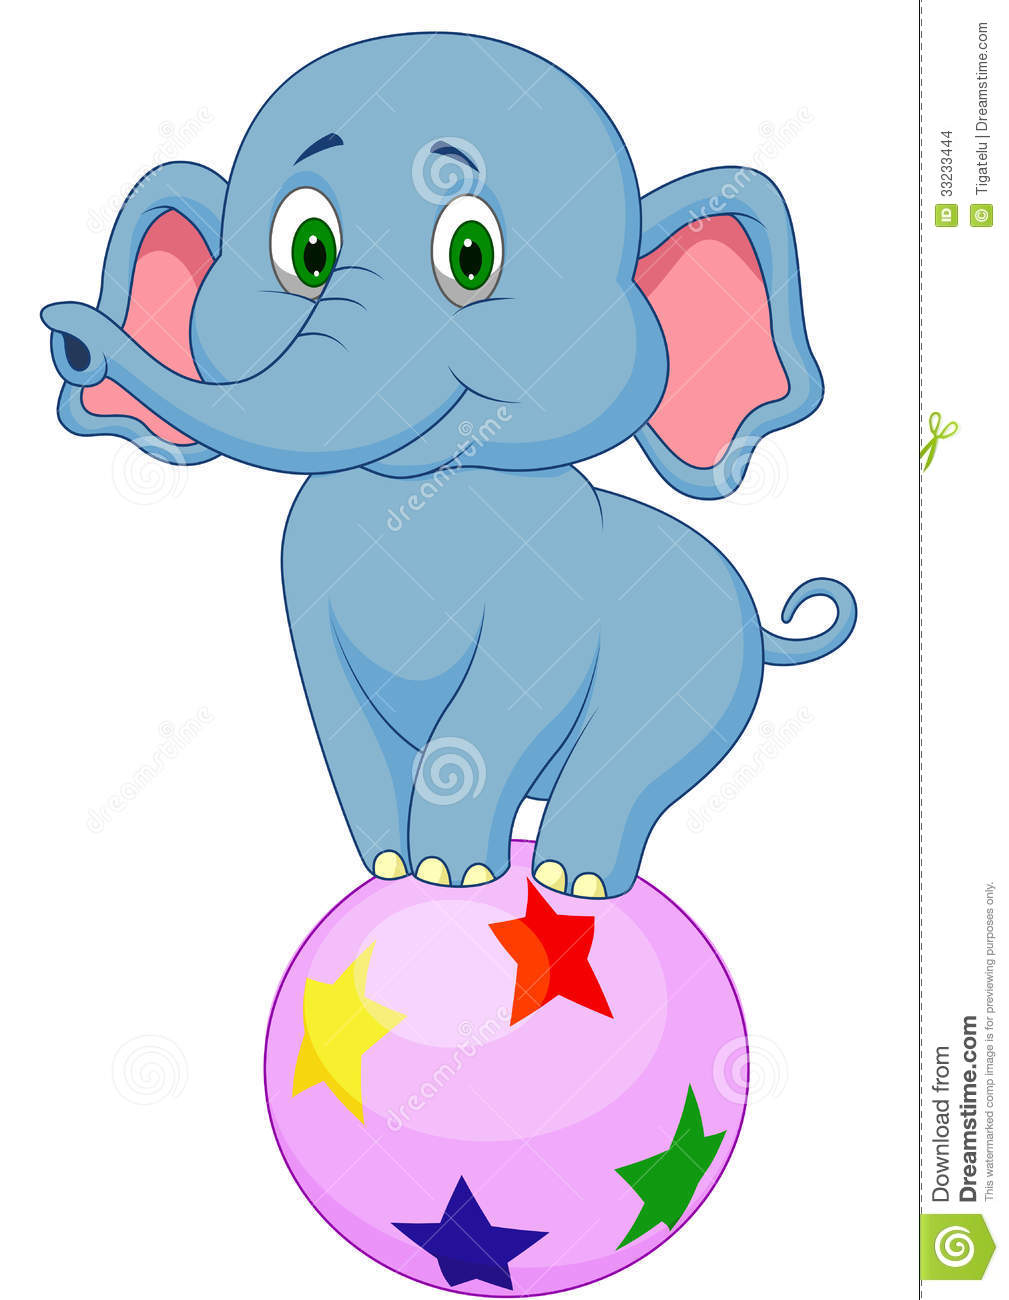 Cute Elephant Cartoon Standing On A Colorful Ball Stock Images   Image    